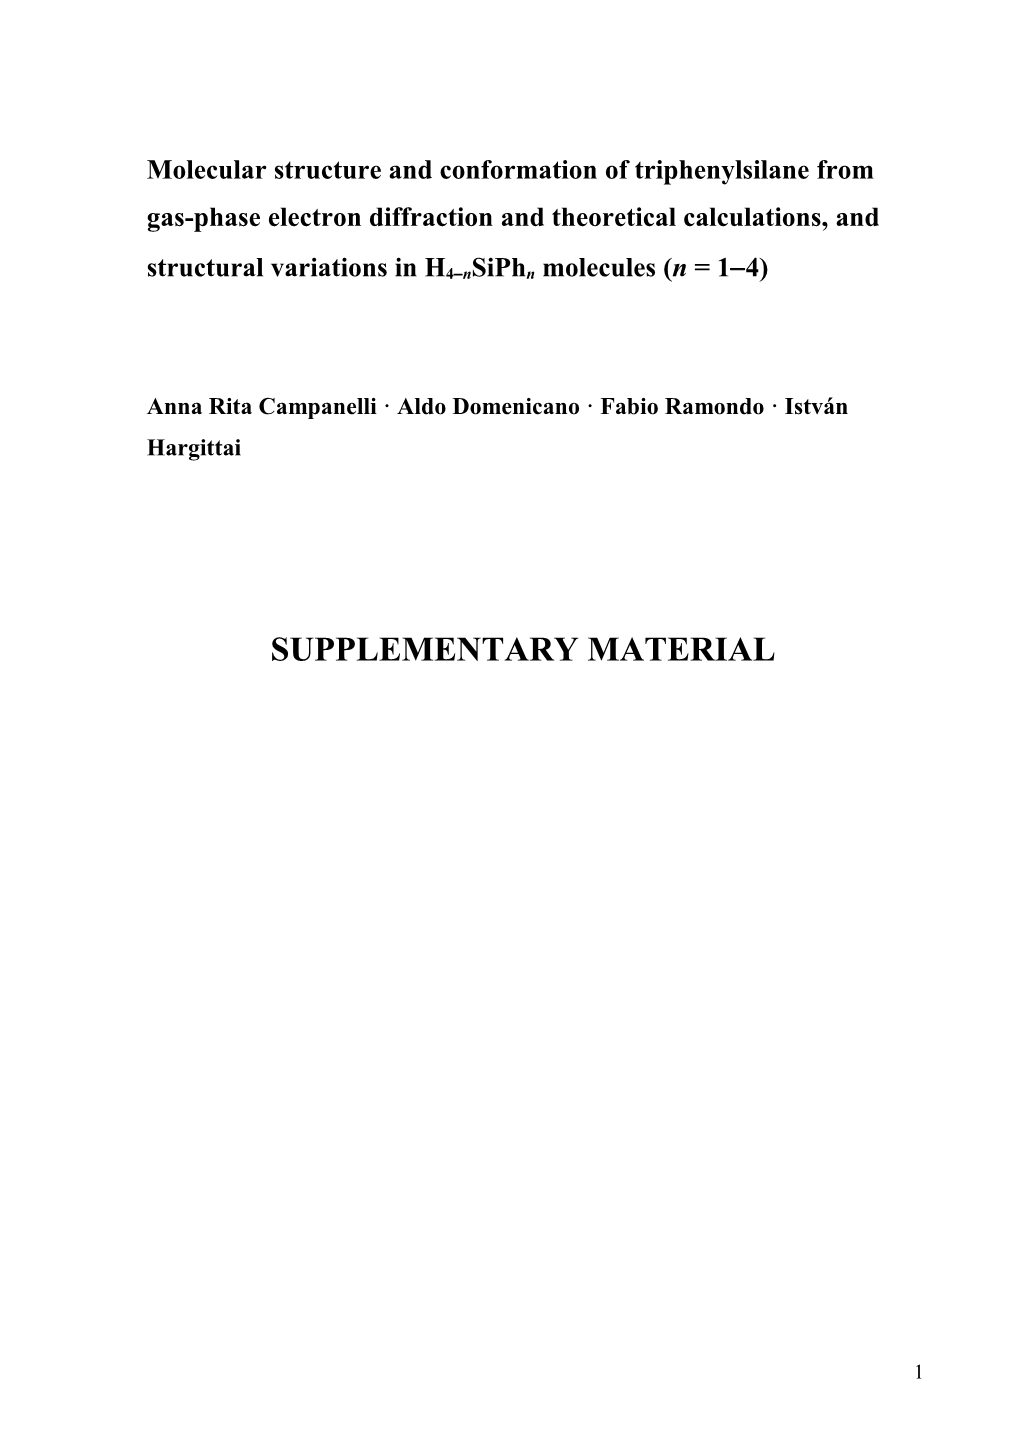 Table 3 Molecular Geometrya of Triphenylsilane: Comparison of Experimental and Theoretical